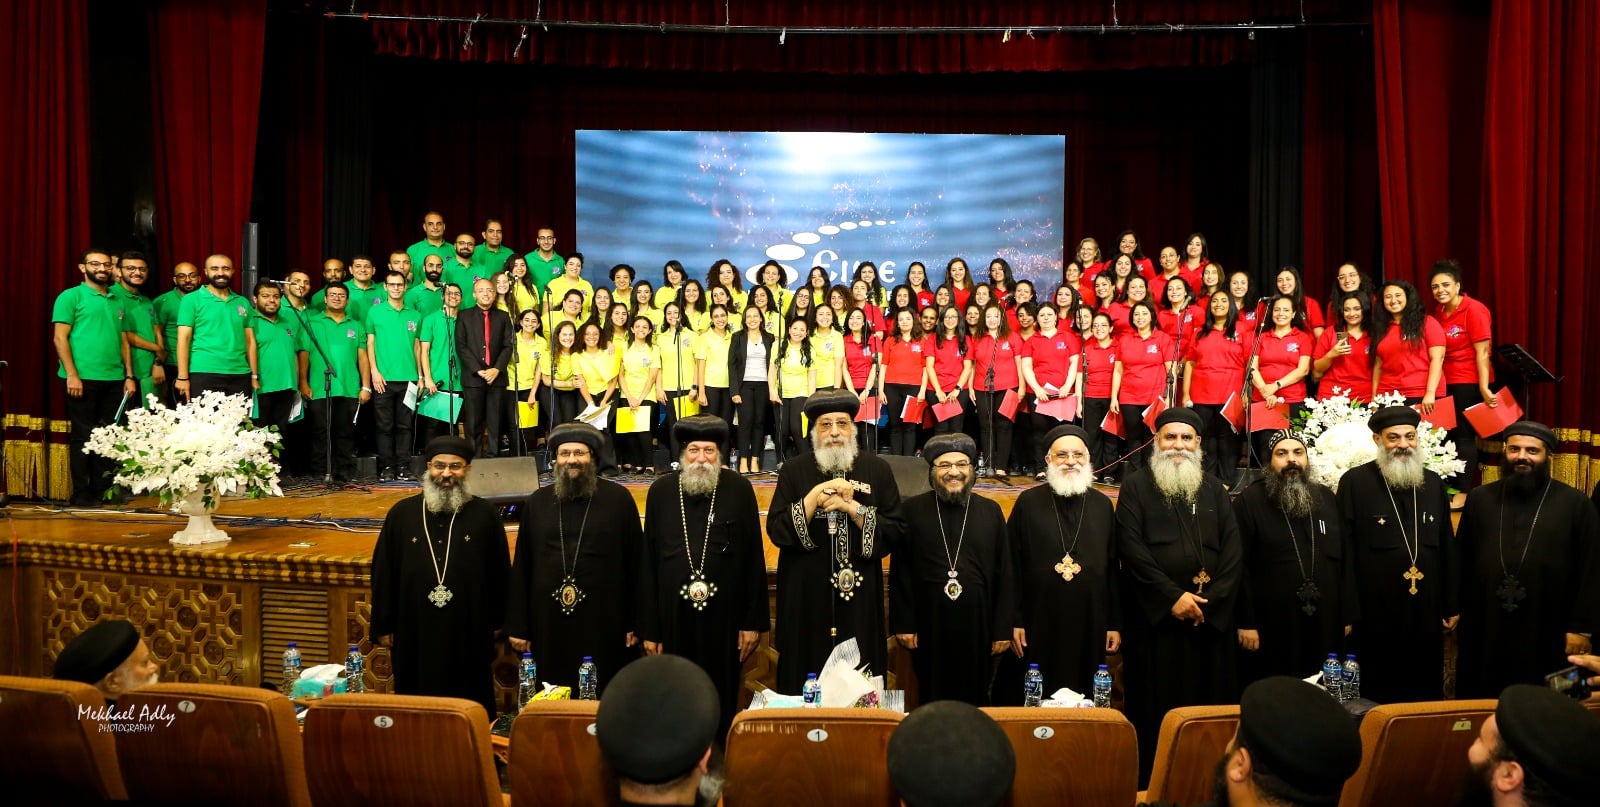 H.H. Pope Tawadros II Witnesses the Graduation Ceremony of the First Cohort of Students at the EIME Center